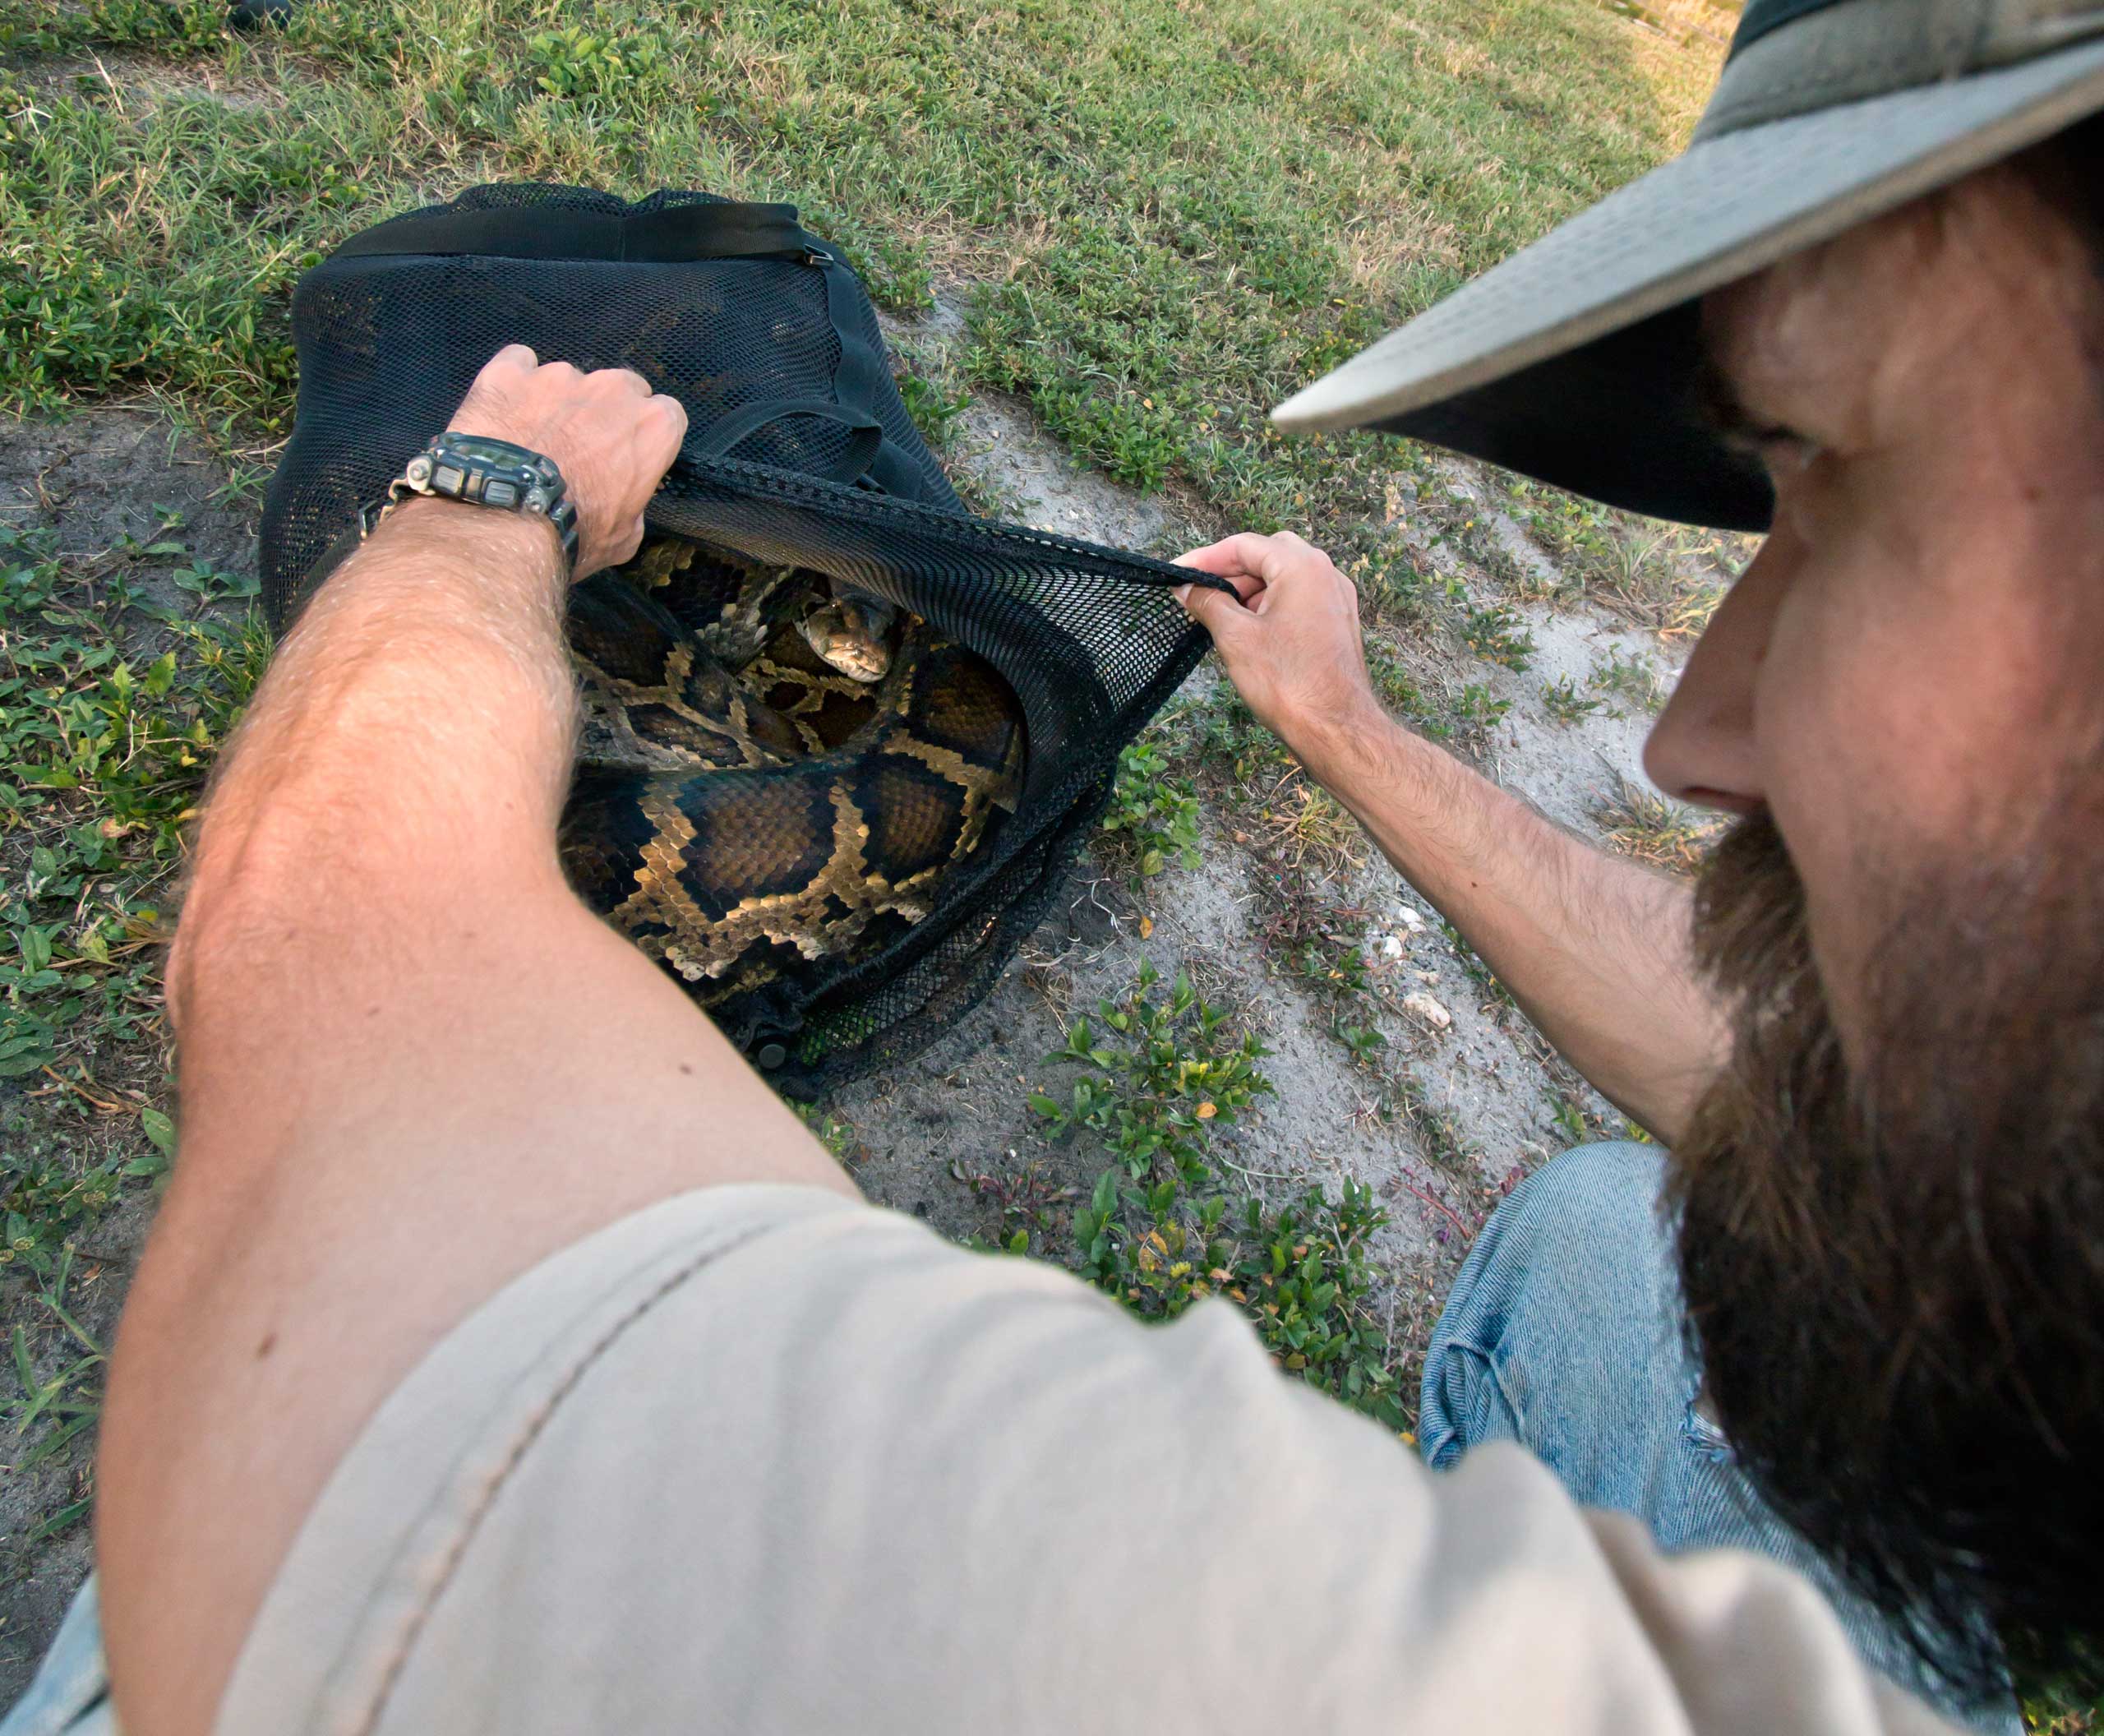 According to NBC News, Metzger said it was especially satisfying to have removed such a large snake from the Everglades ecosystem. The snake was euthanized.